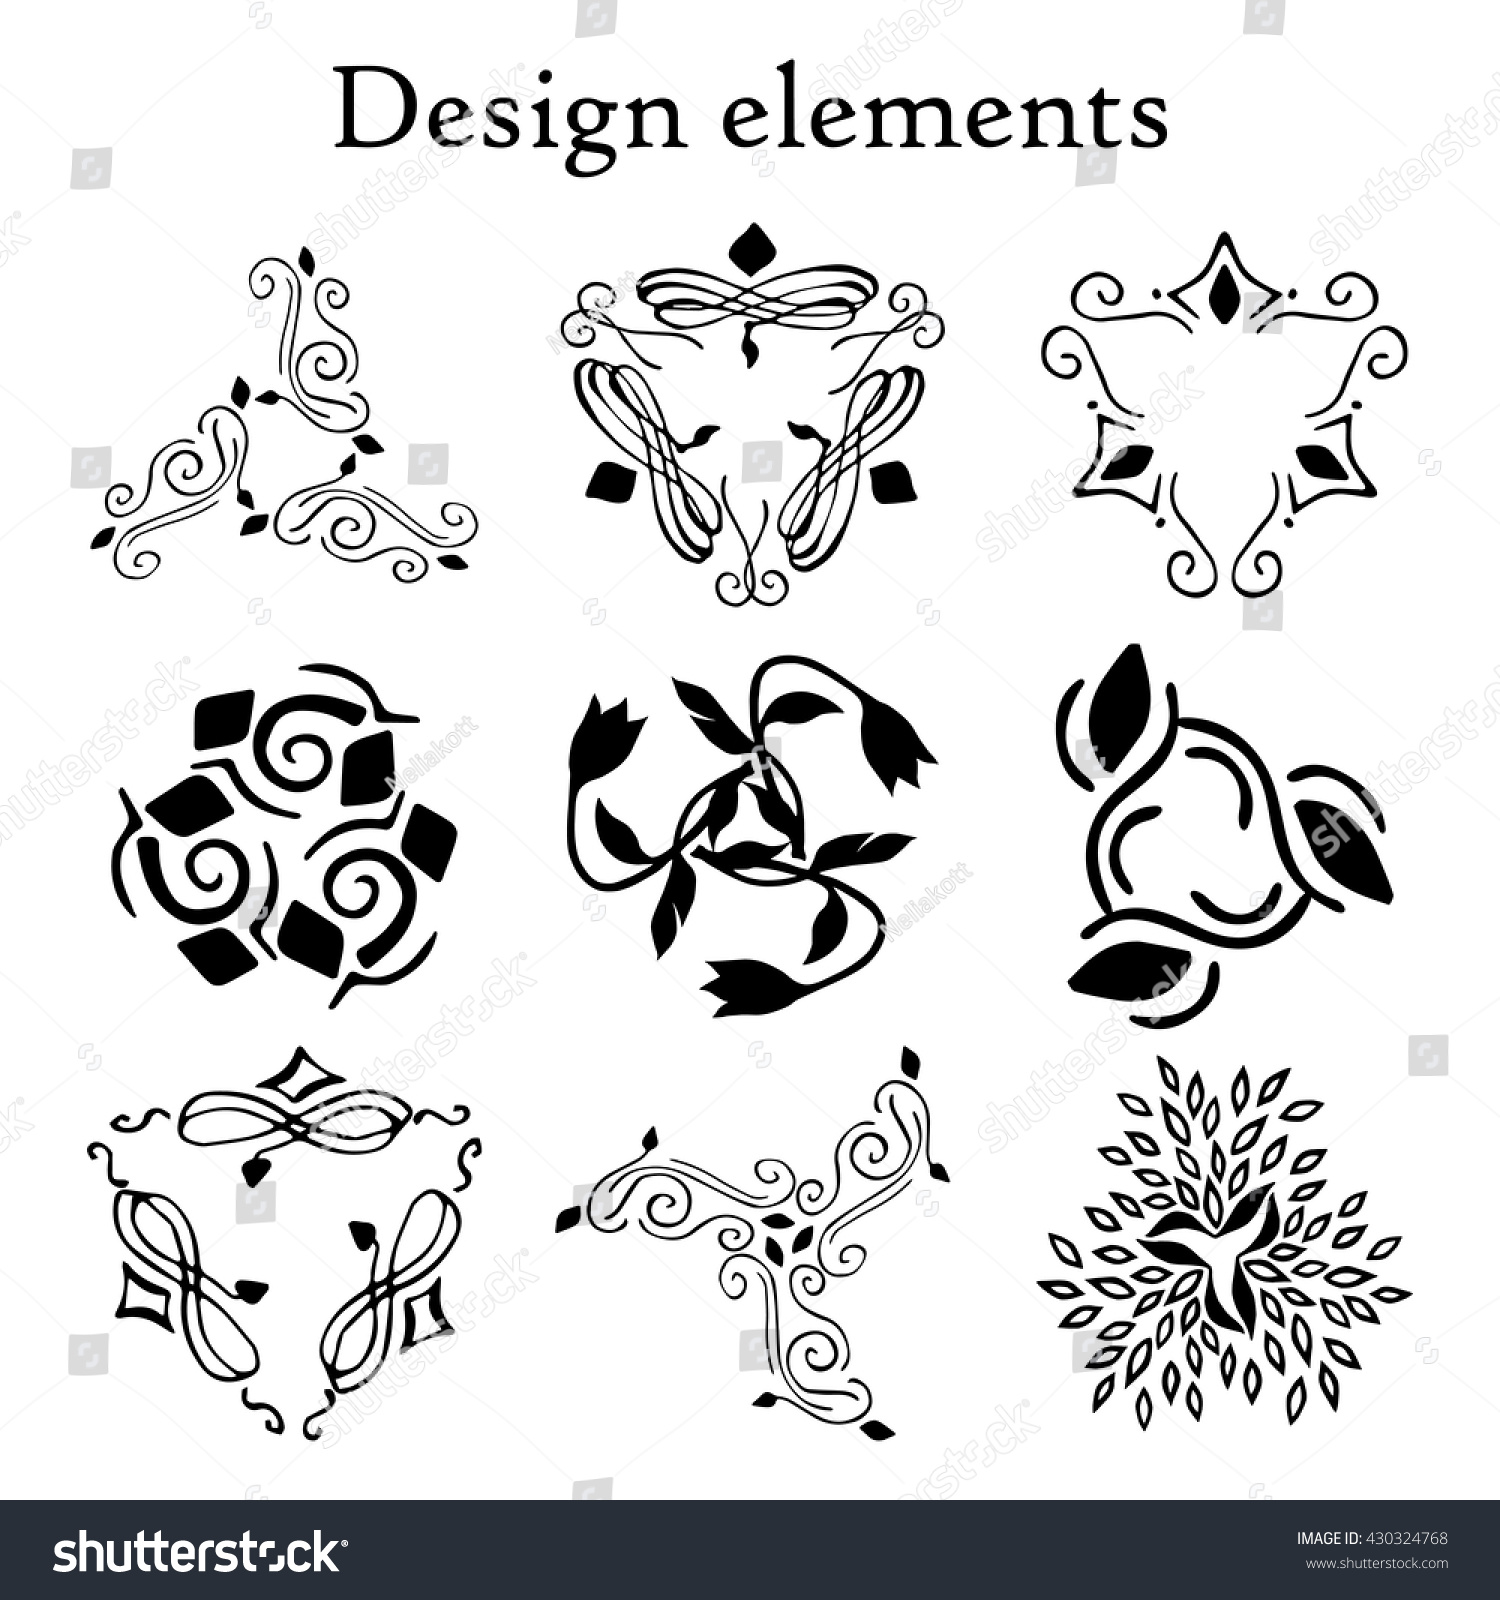 Design elements set, patterns, finials three-pointed. Vector. On a white background. Set of 9 calligraphic elements. #430324768